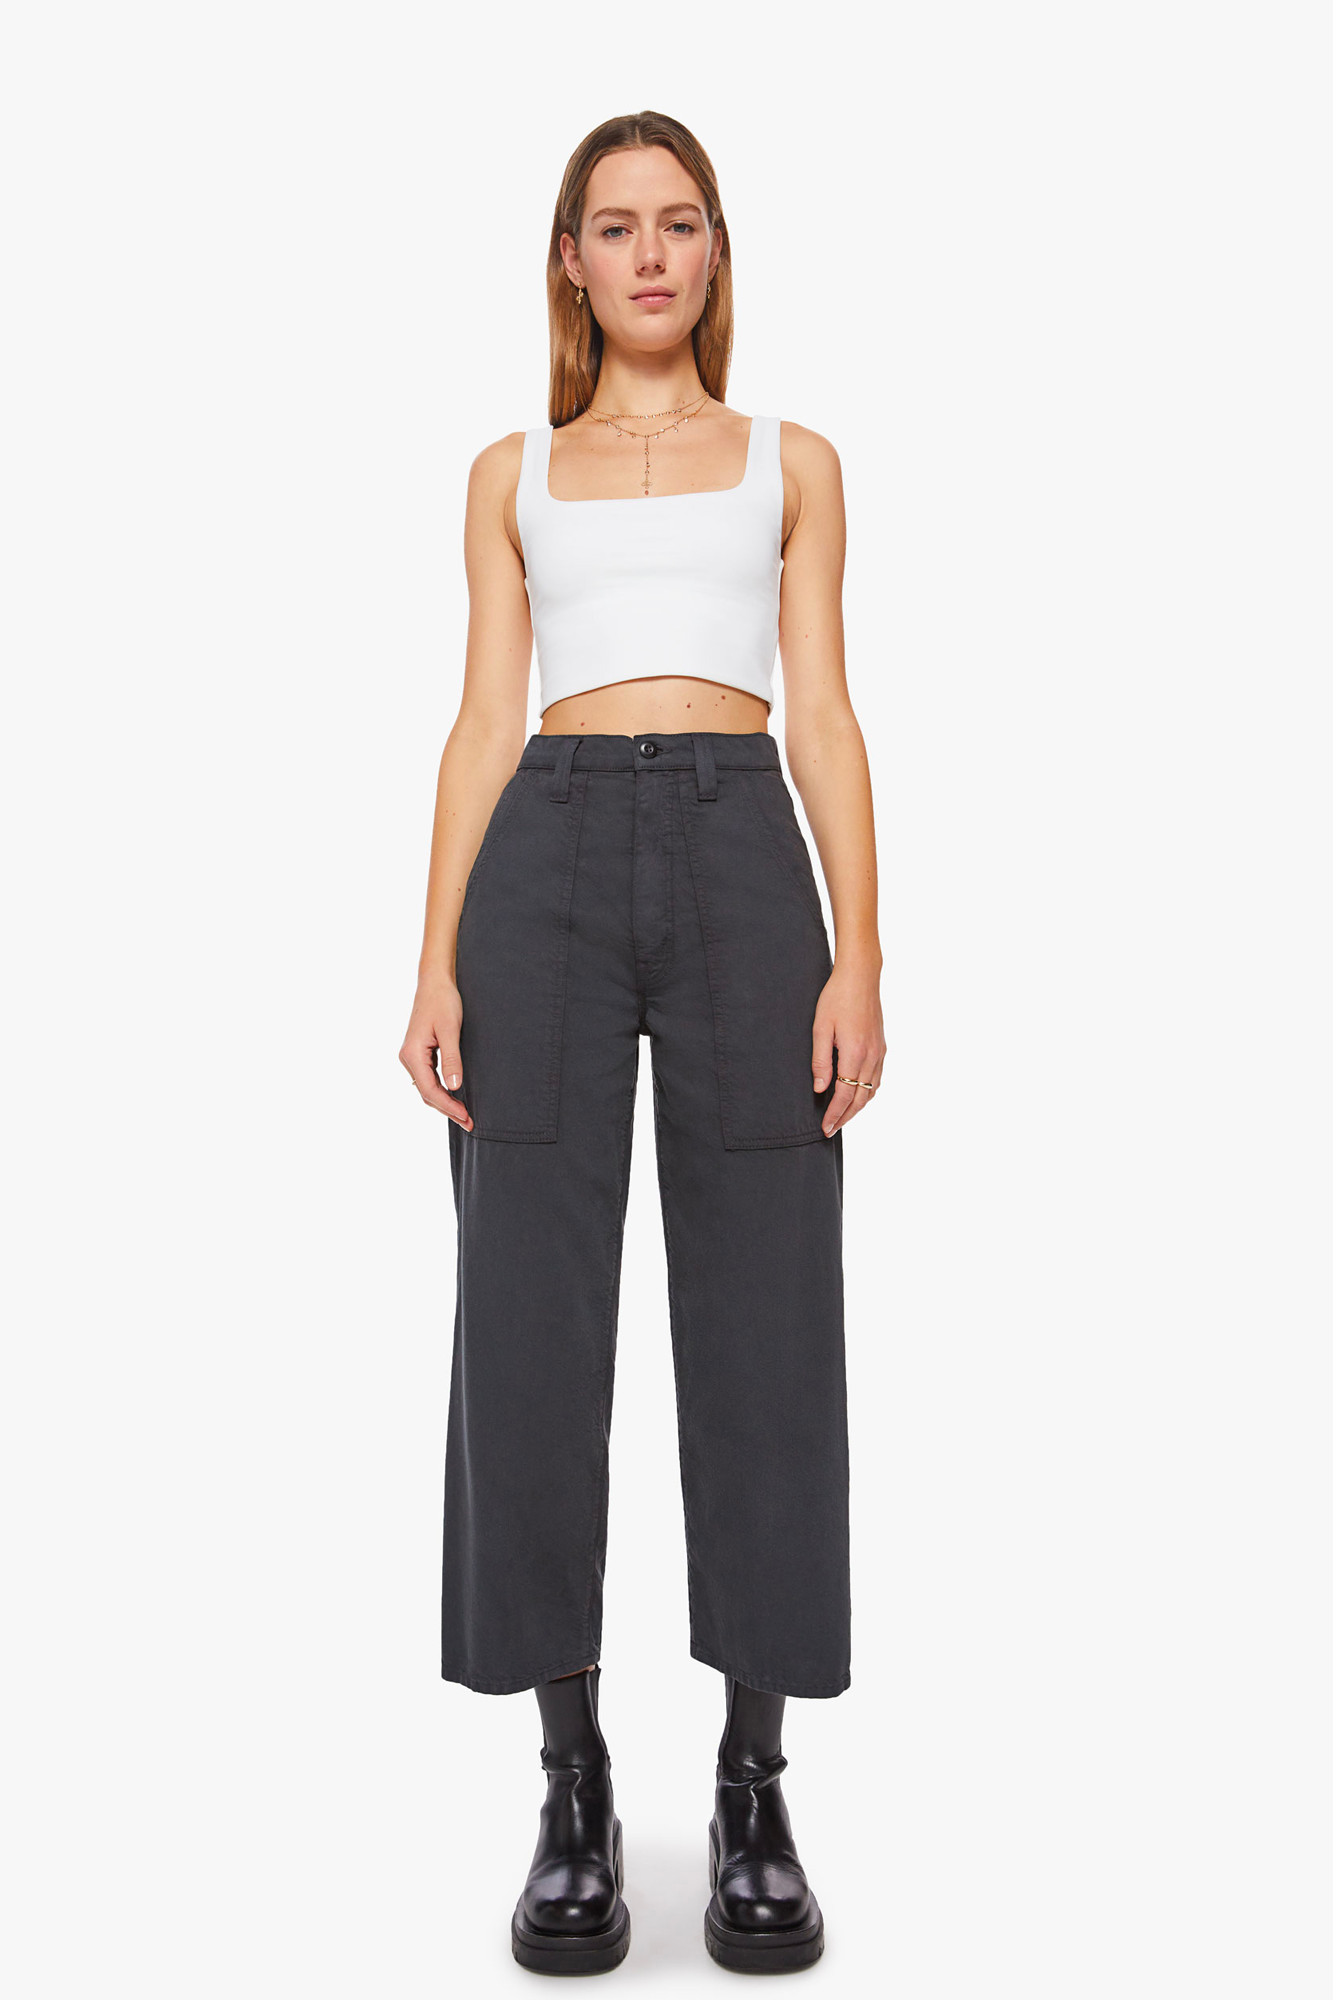 The Quartet Breaker Flood is a high-waisted pant with double patch pockets and a wide straight leg for maximum comfort.